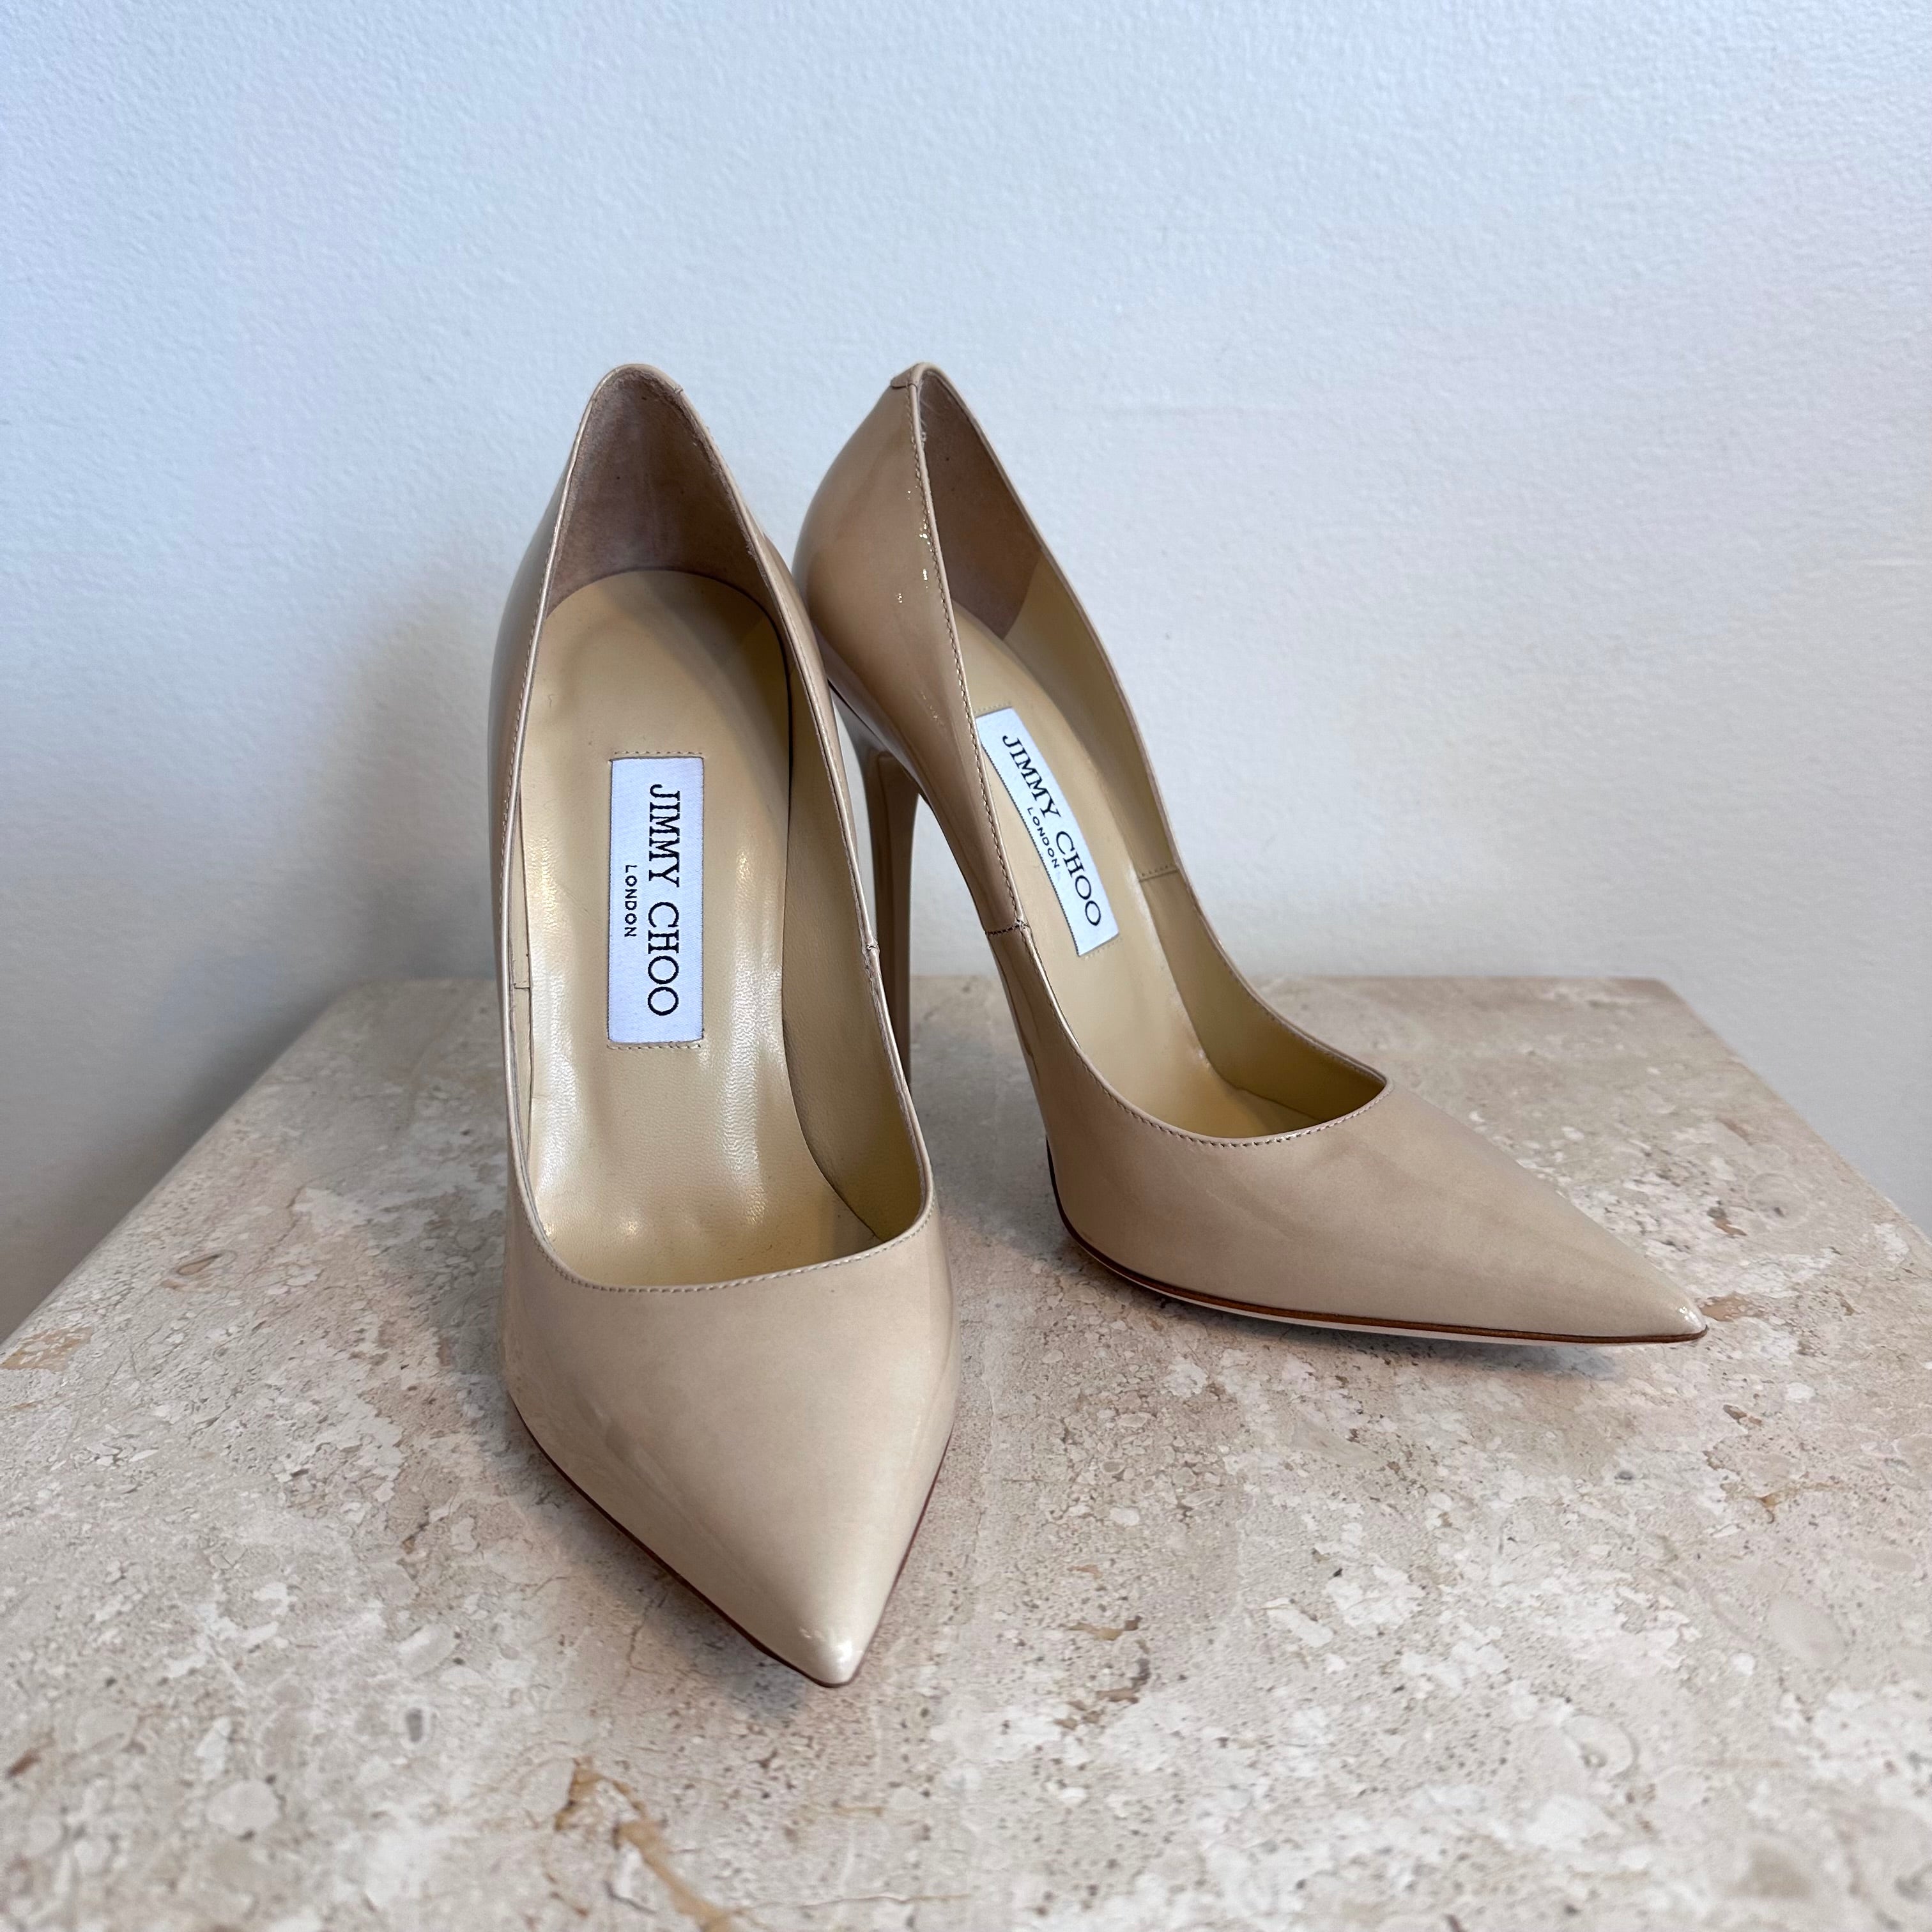 Pre-Owned JIMMY CHOO Anouk Nude Patent Leather Heel - Size 37